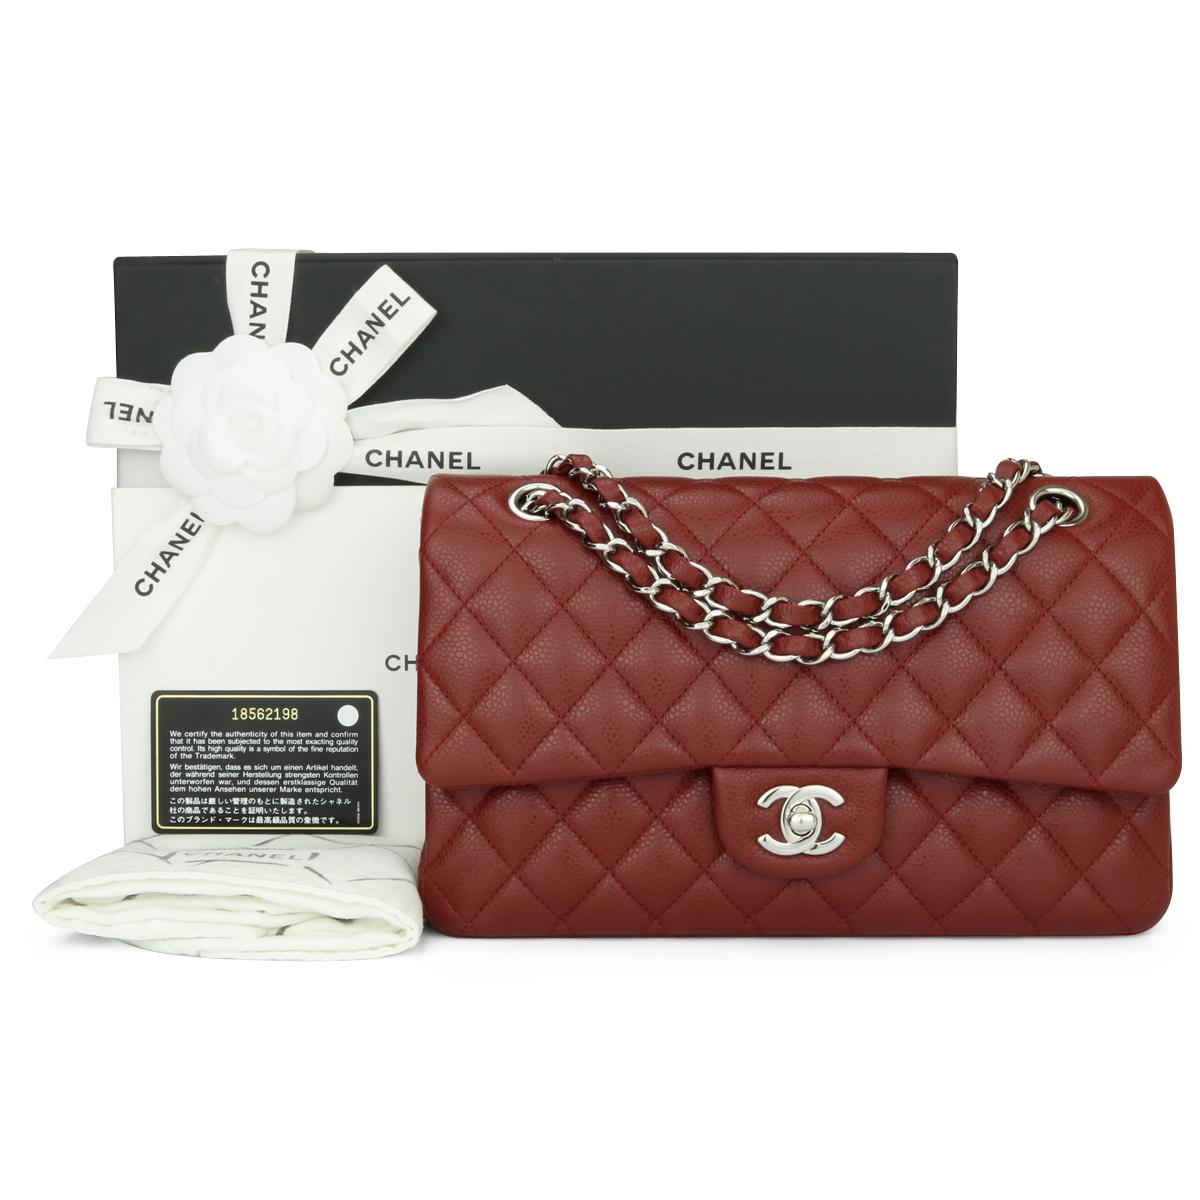 CHANEL Classic Double Flap Bag Medium Burgundy Caviar with Silver Hardware 2014 11